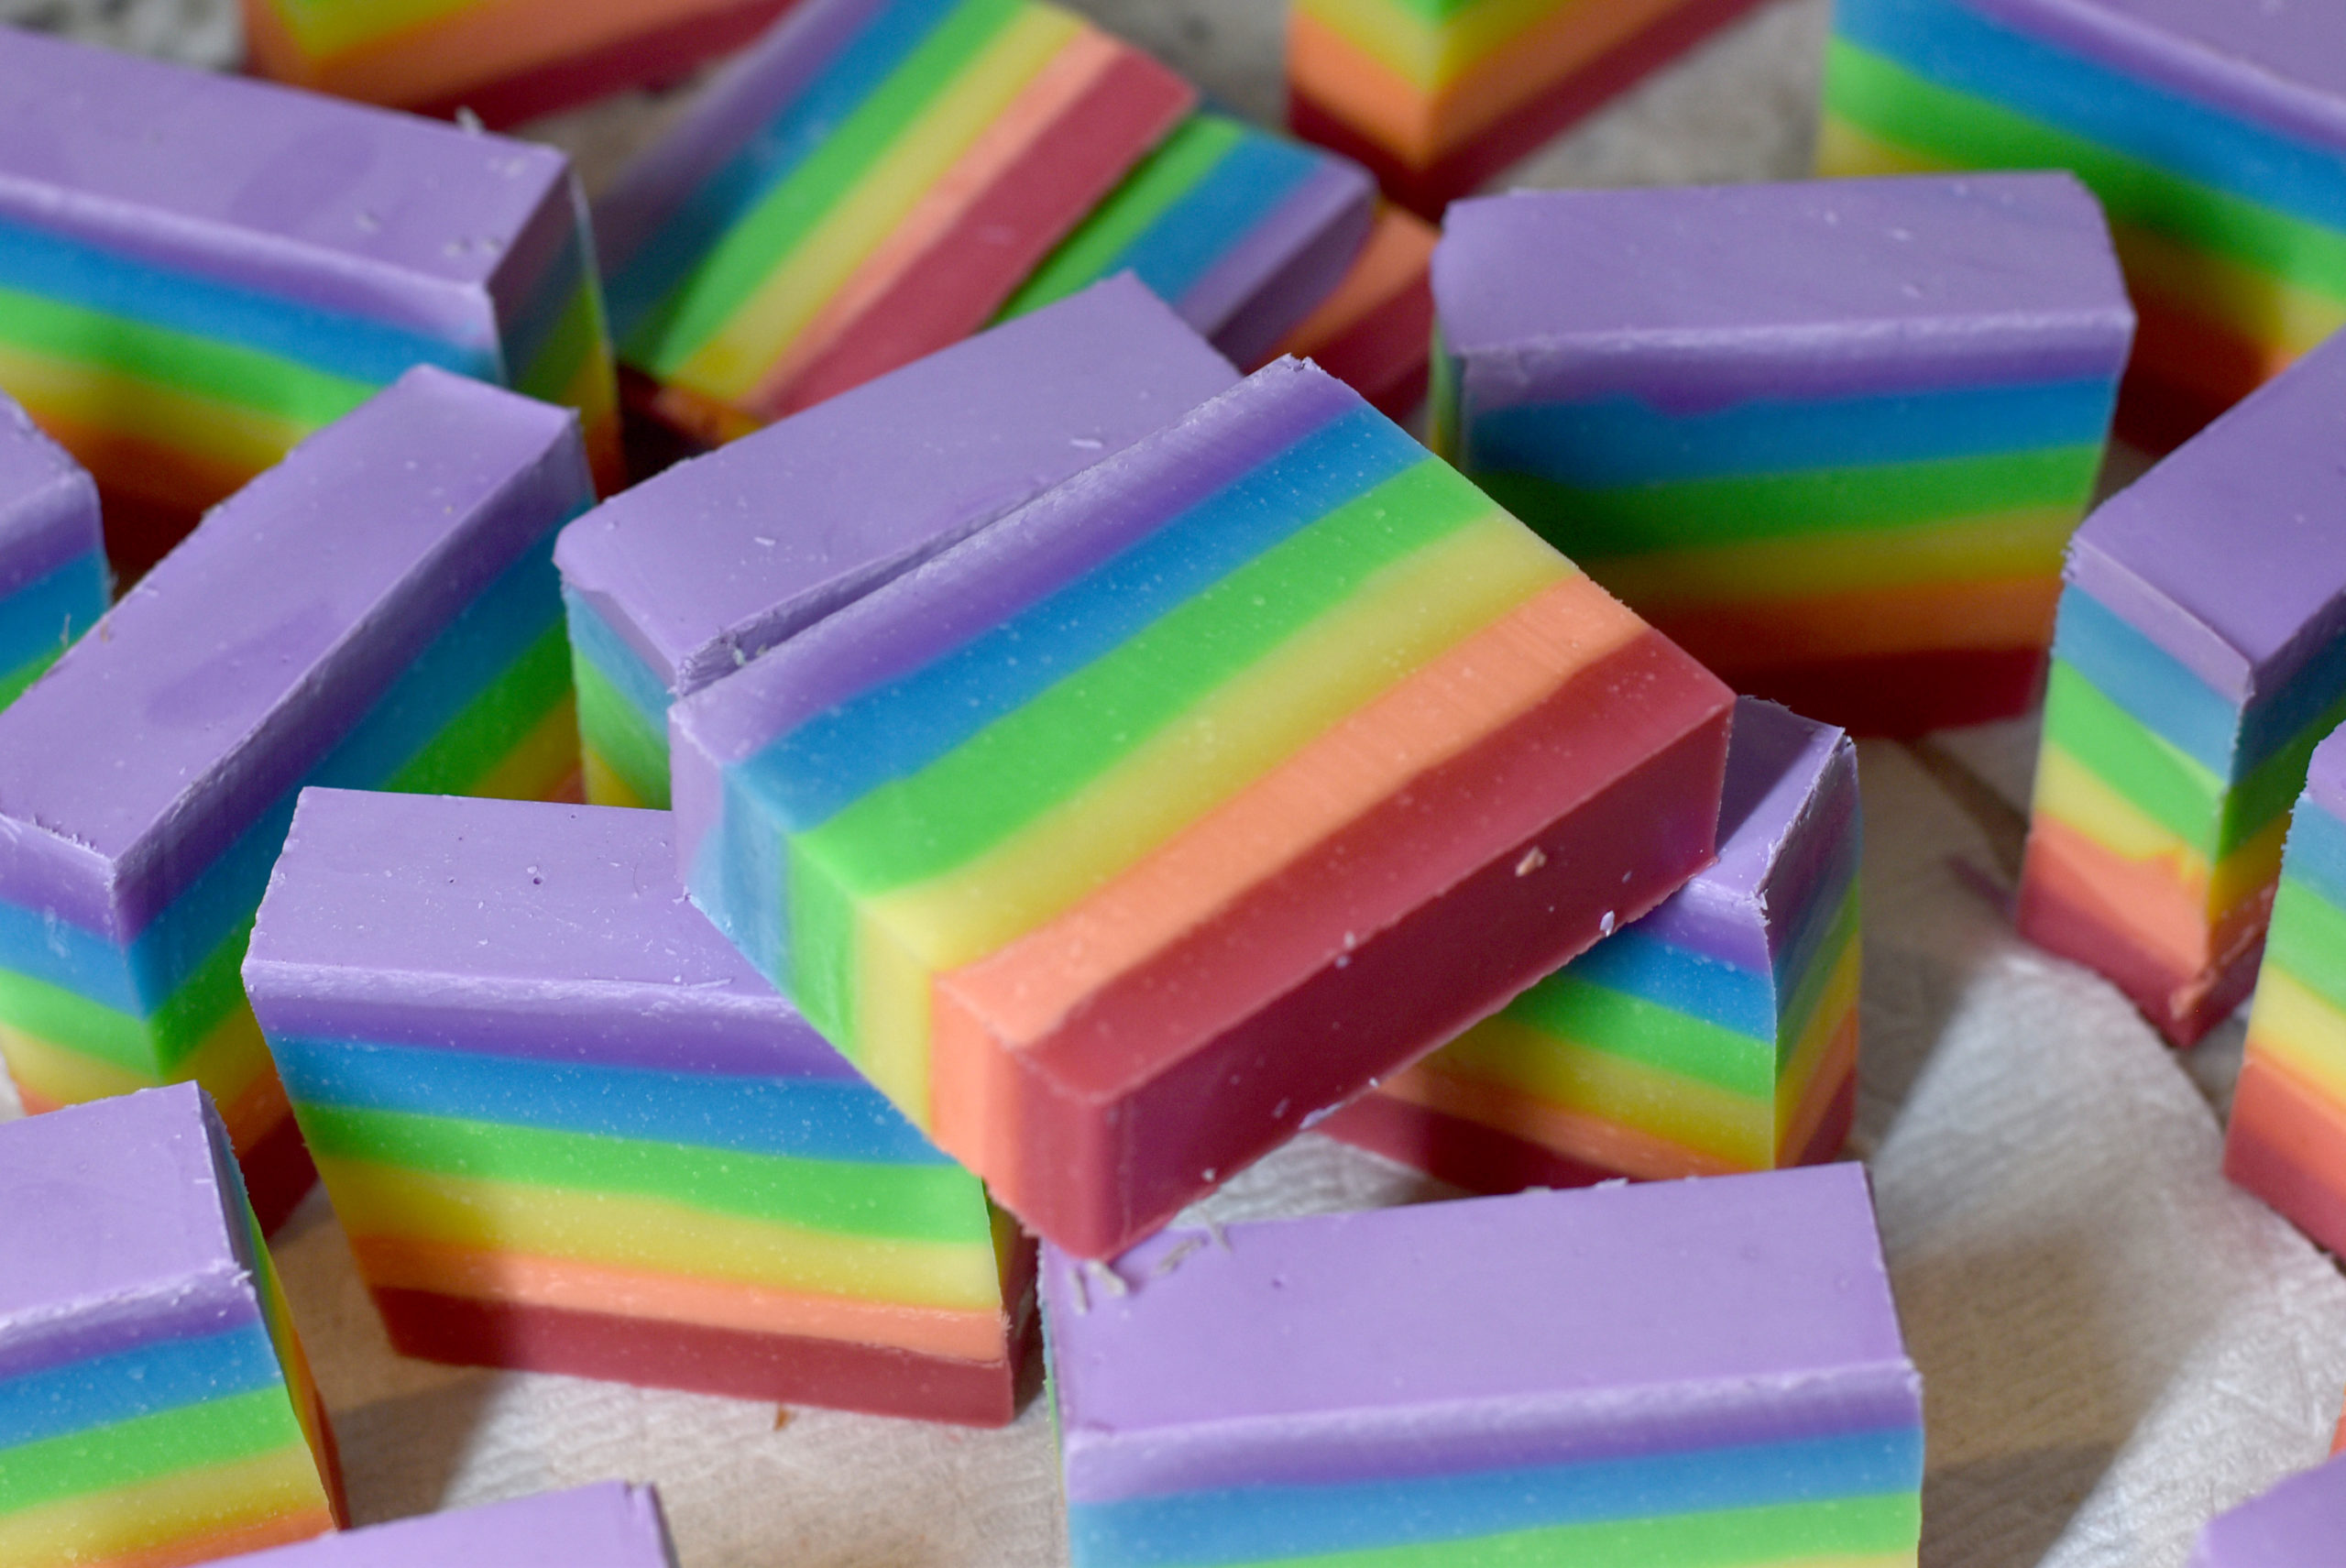 How To Make Colourful Jelly Soap At Home